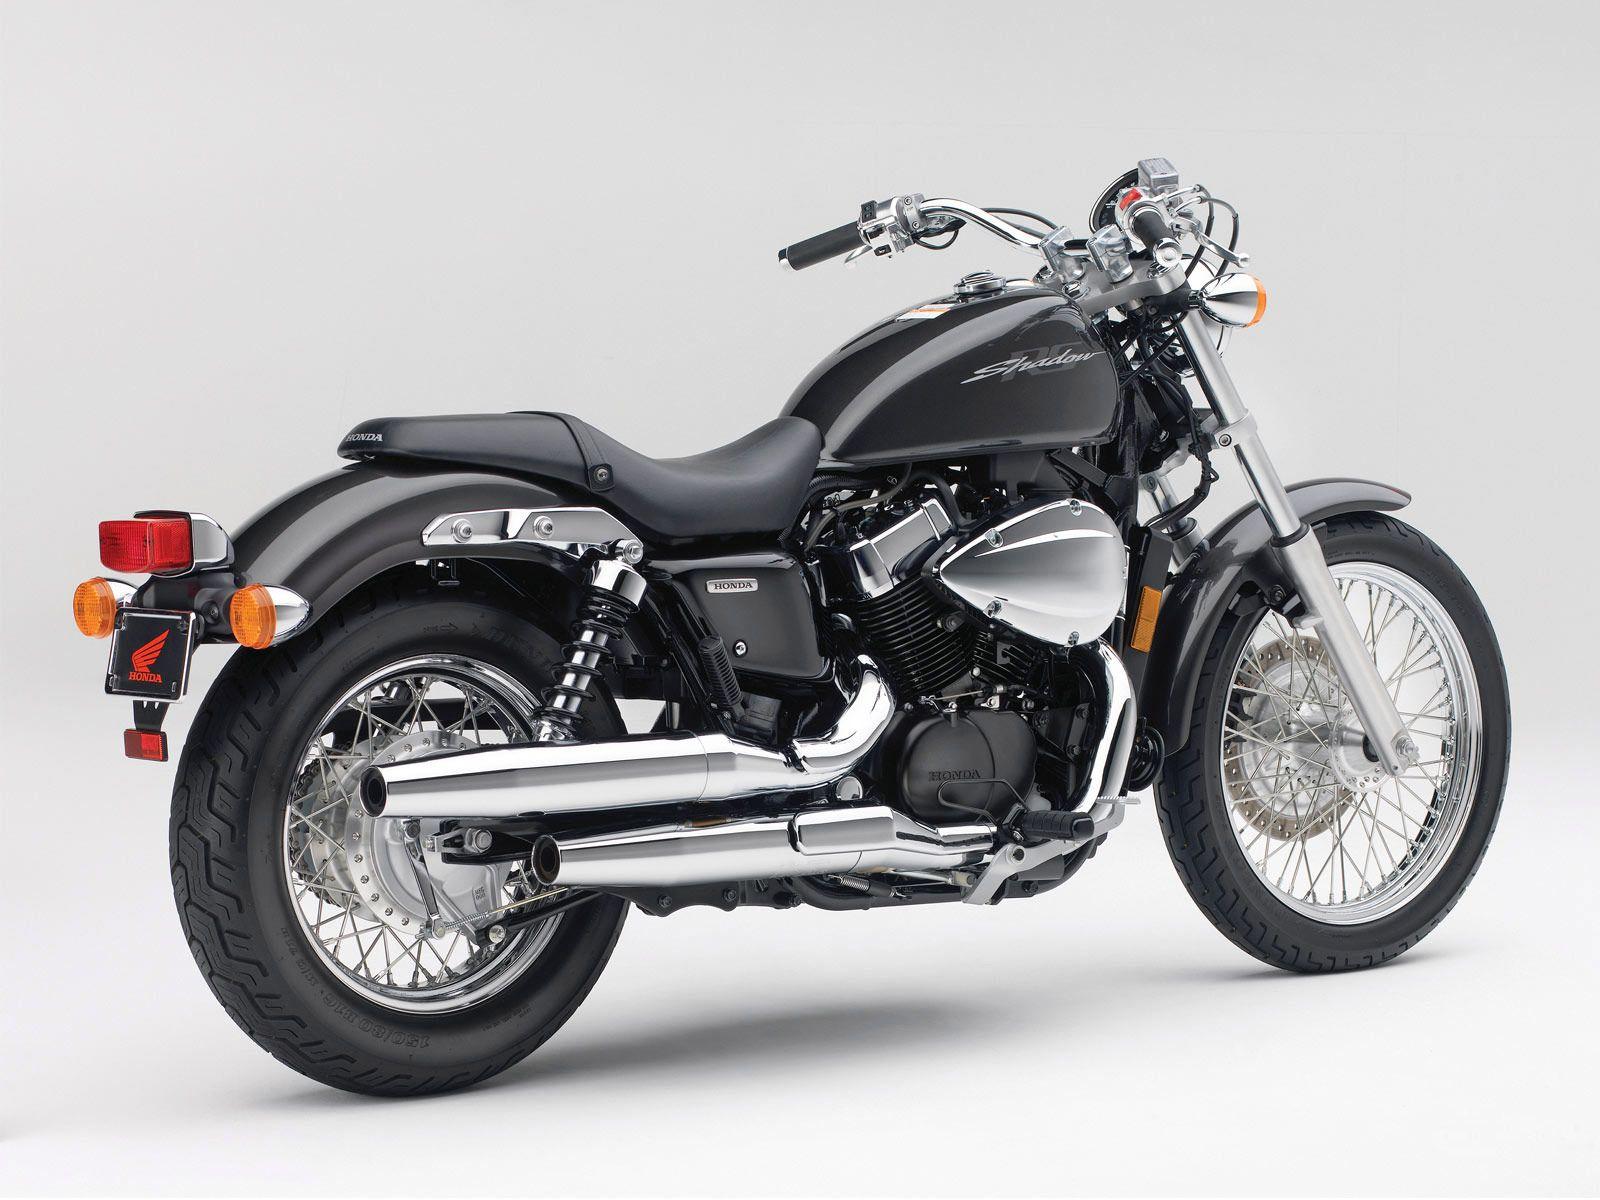 HONDA Shadow RS accident lawyers info, motorcycle wallpaper